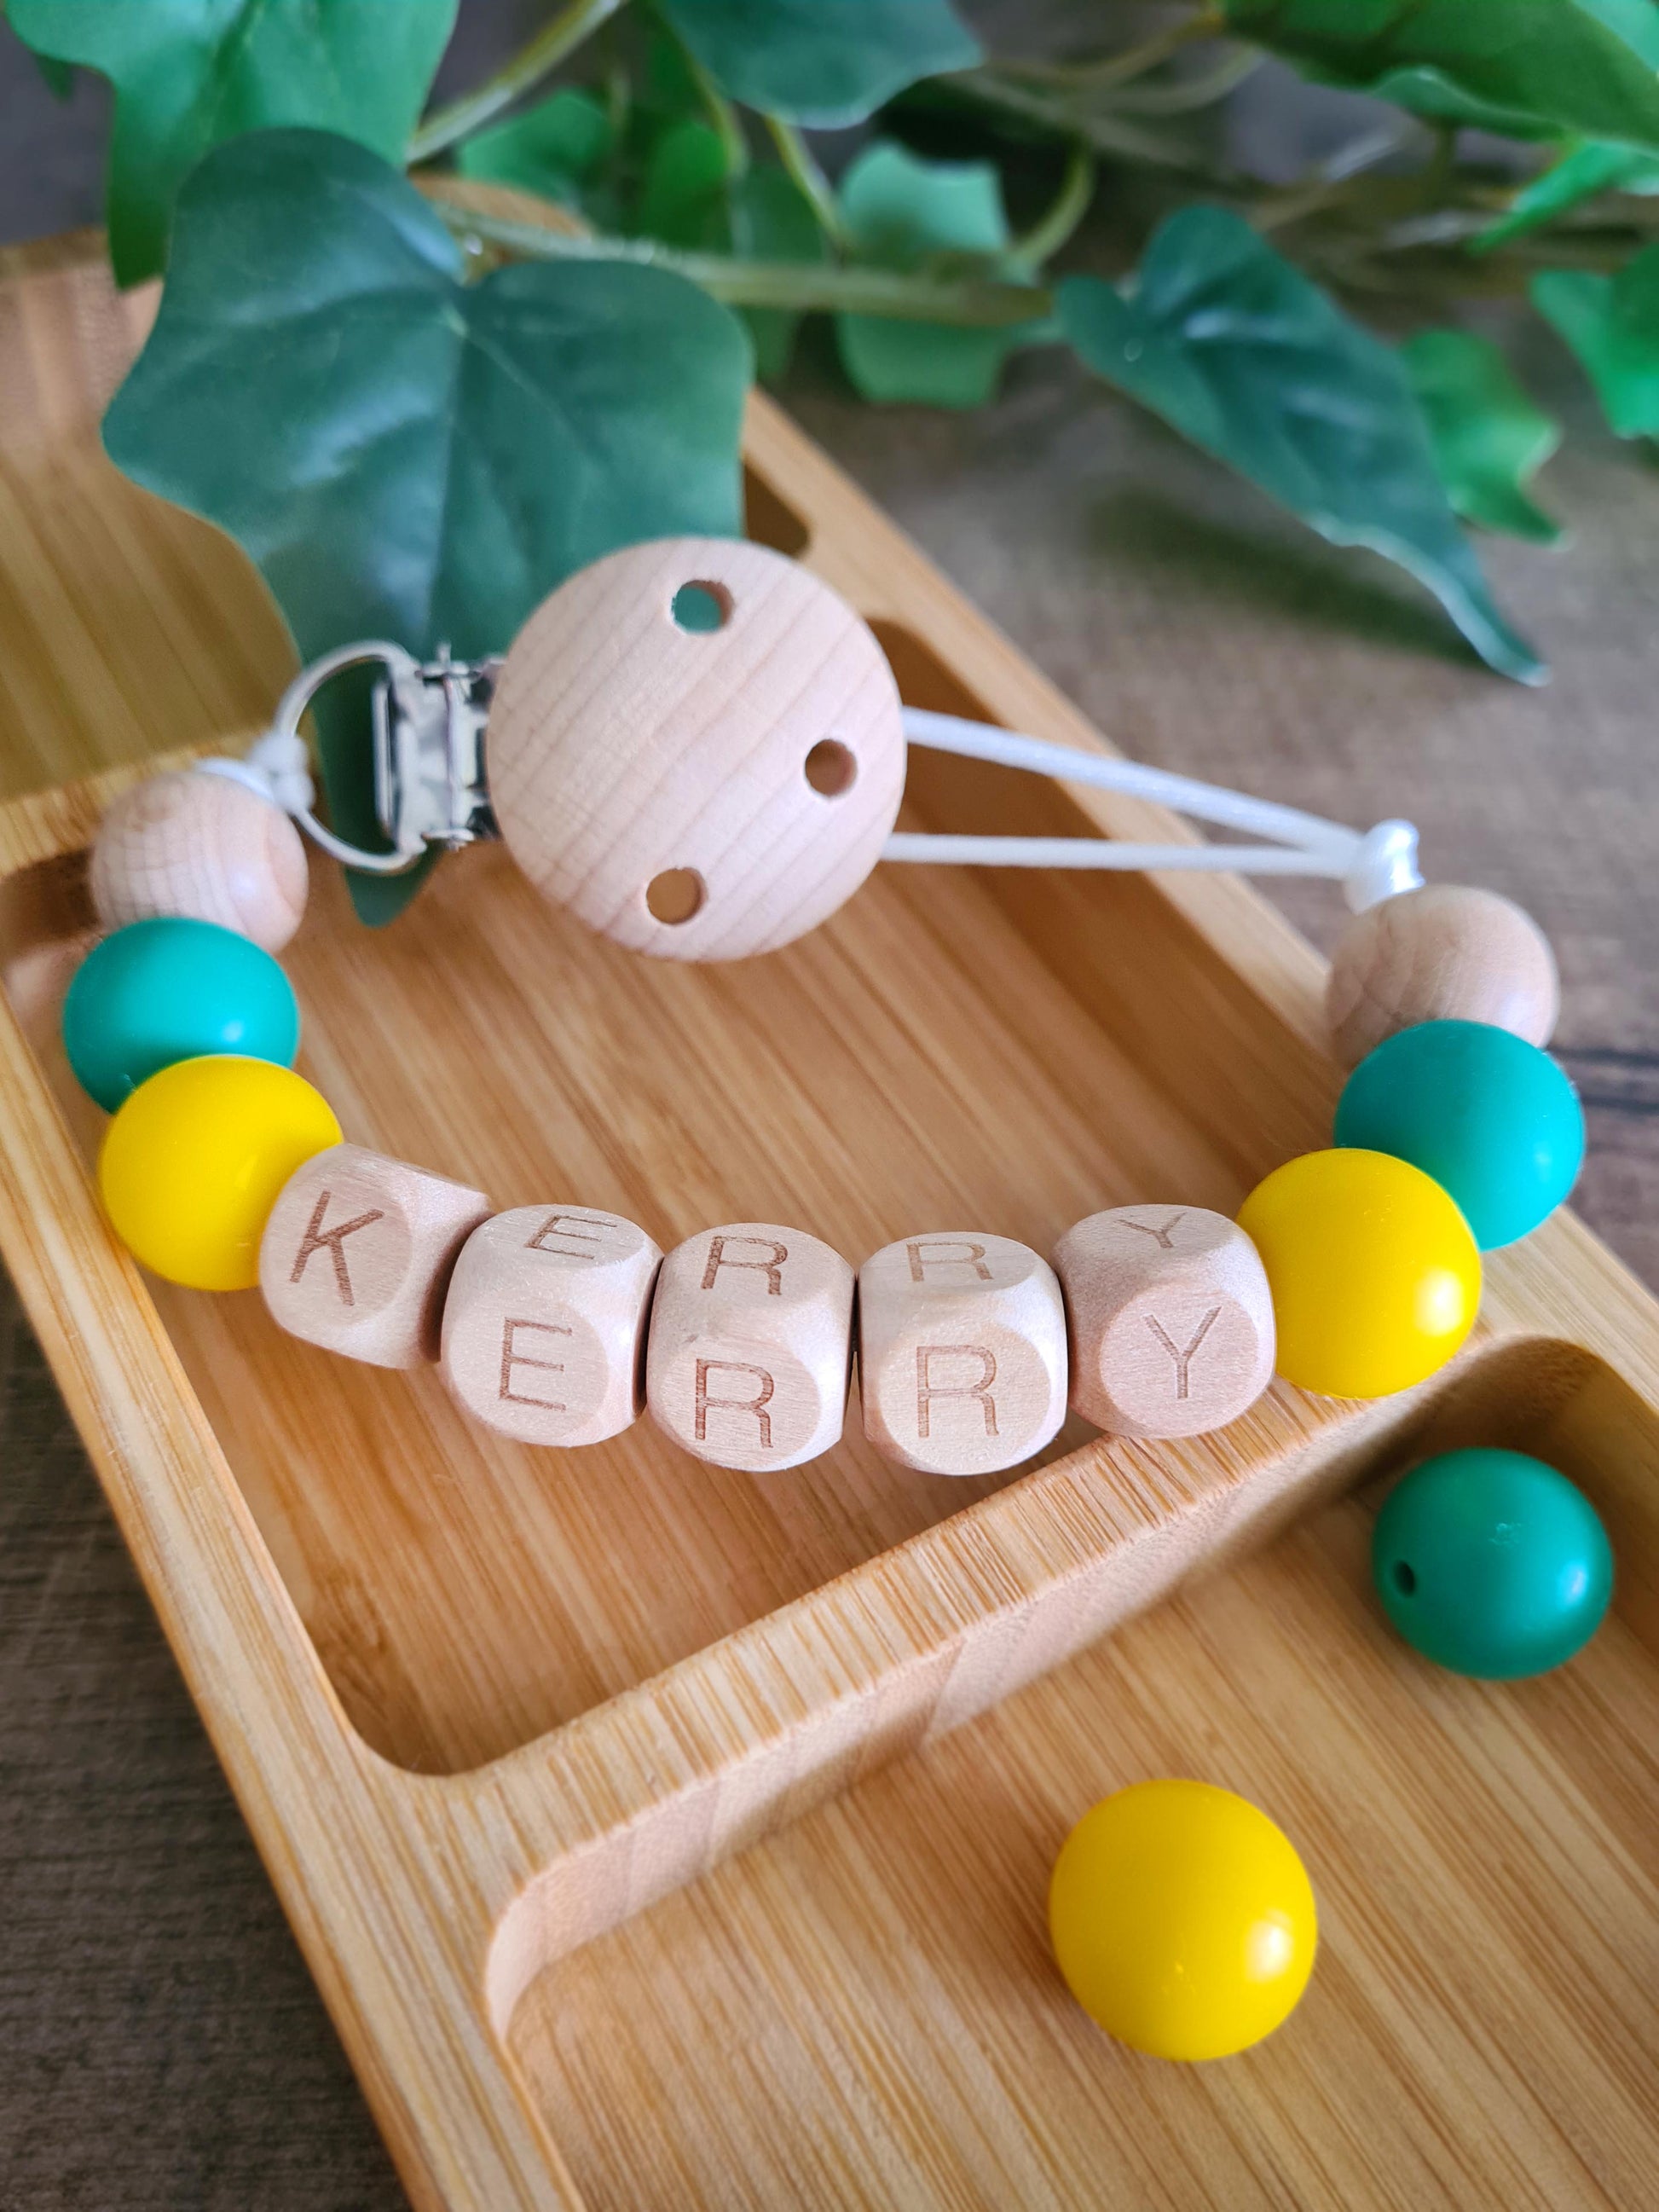 Soother clip for Kerry football GAA fans, County Kerry Hurling, GAA Kerry babies! Who doesn't love the Kerry colours?! The perfect gift for Kerry LGFA Mamas!